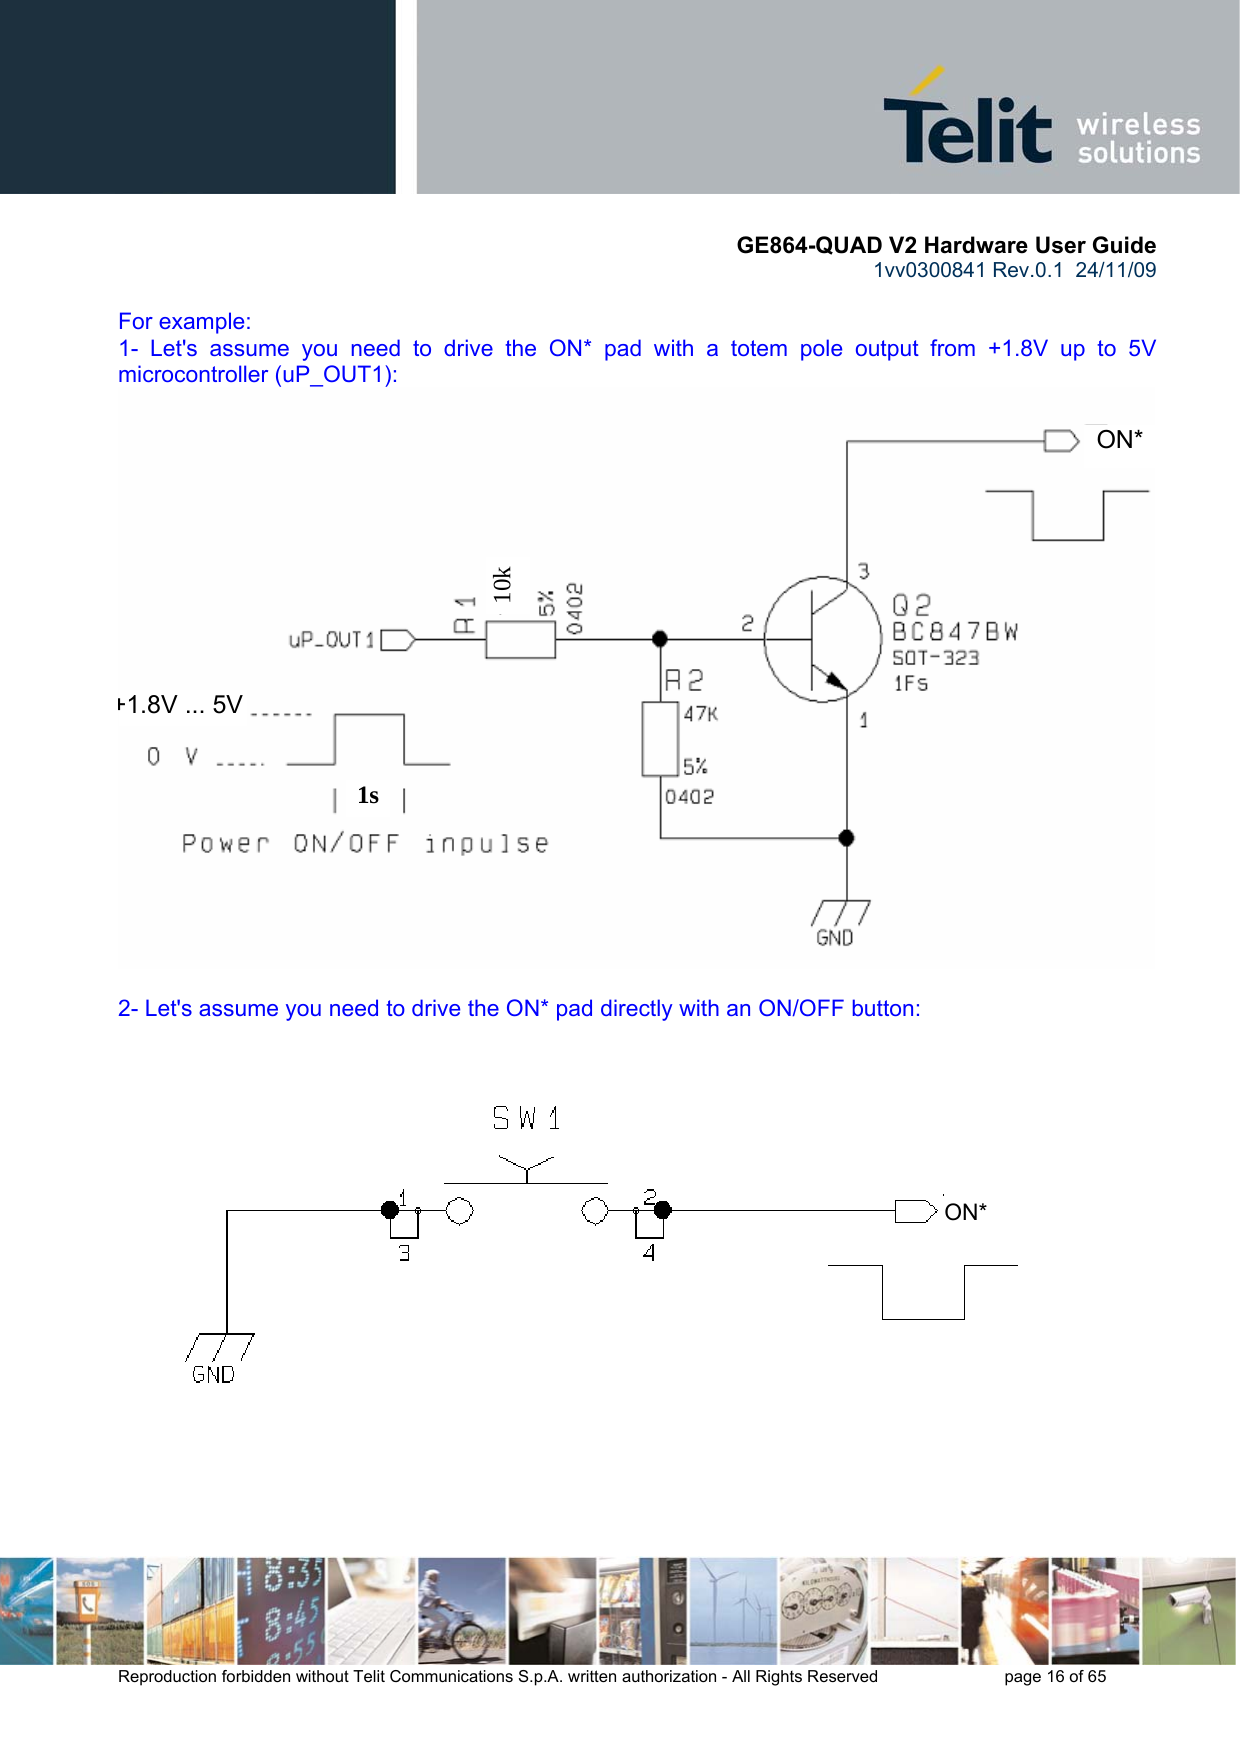       GE864-QUAD V2 Hardware User Guide 1vv0300841 Rev.0.1  24/11/09      Reproduction forbidden without Telit Communications S.p.A. written authorization - All Rights Reserved    page 16 of 65   For example: 1- Let&apos;s assume you need to drive the ON* pad with a totem pole output from +1.8V up to 5V microcontroller (uP_OUT1):  2- Let&apos;s assume you need to drive the ON* pad directly with an ON/OFF button:    1s10k   ON*+1.8V ... 5V    ON* 